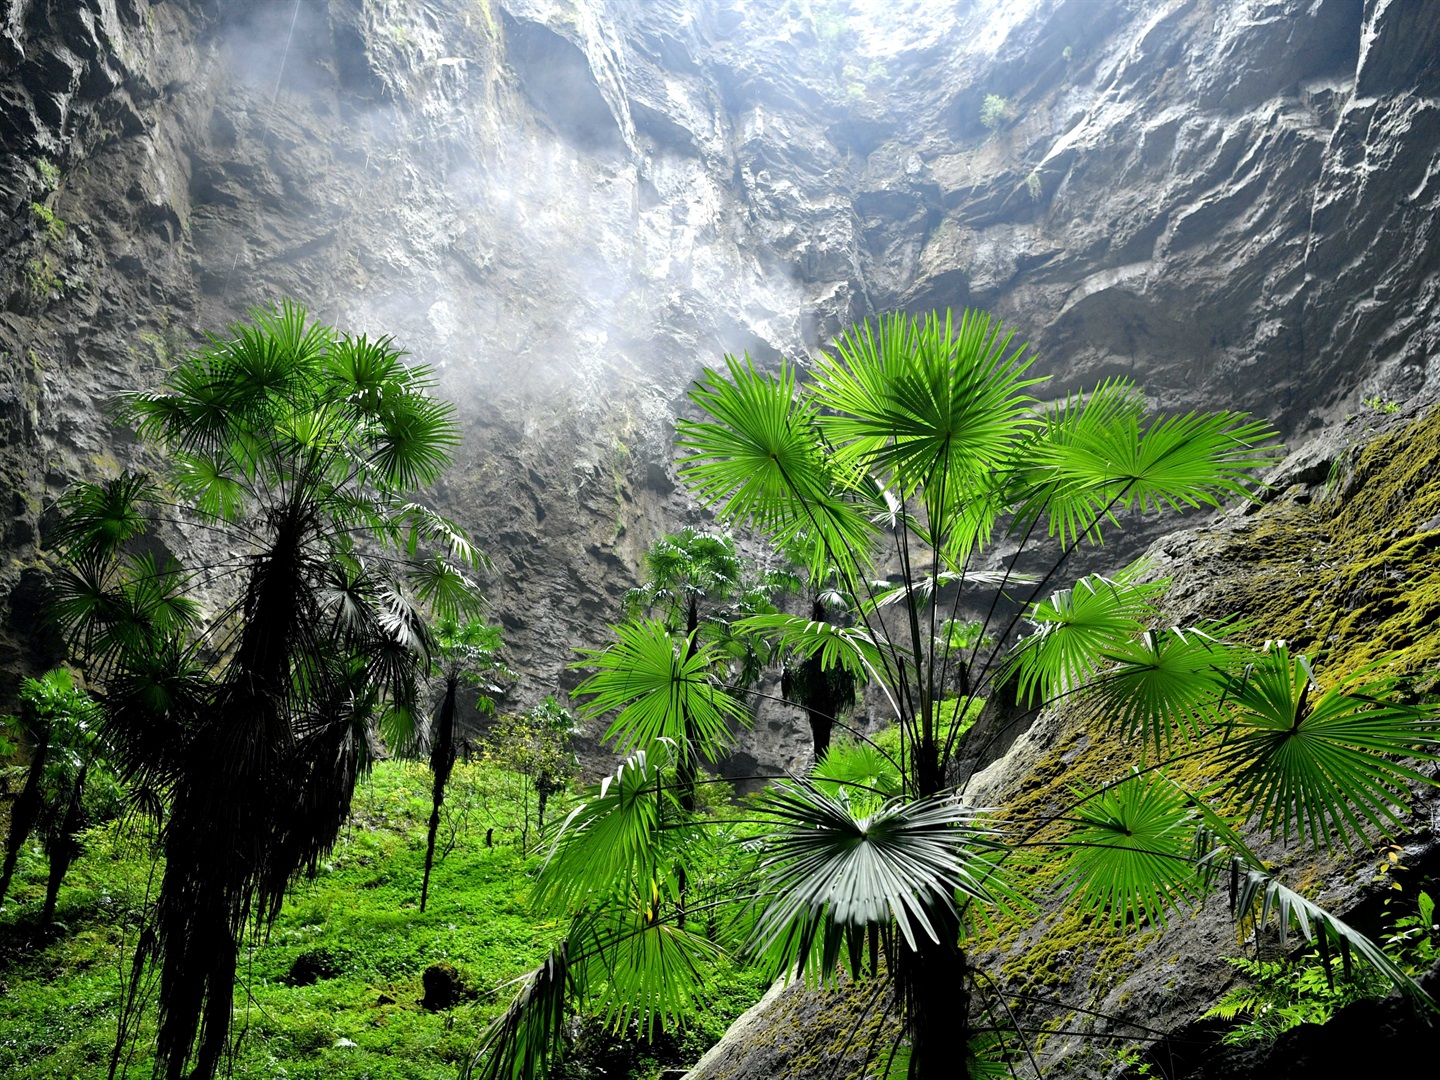 Trees in Tianqen, or giant karst pit, in China.  Wen / Xinhua Song via Getty Images